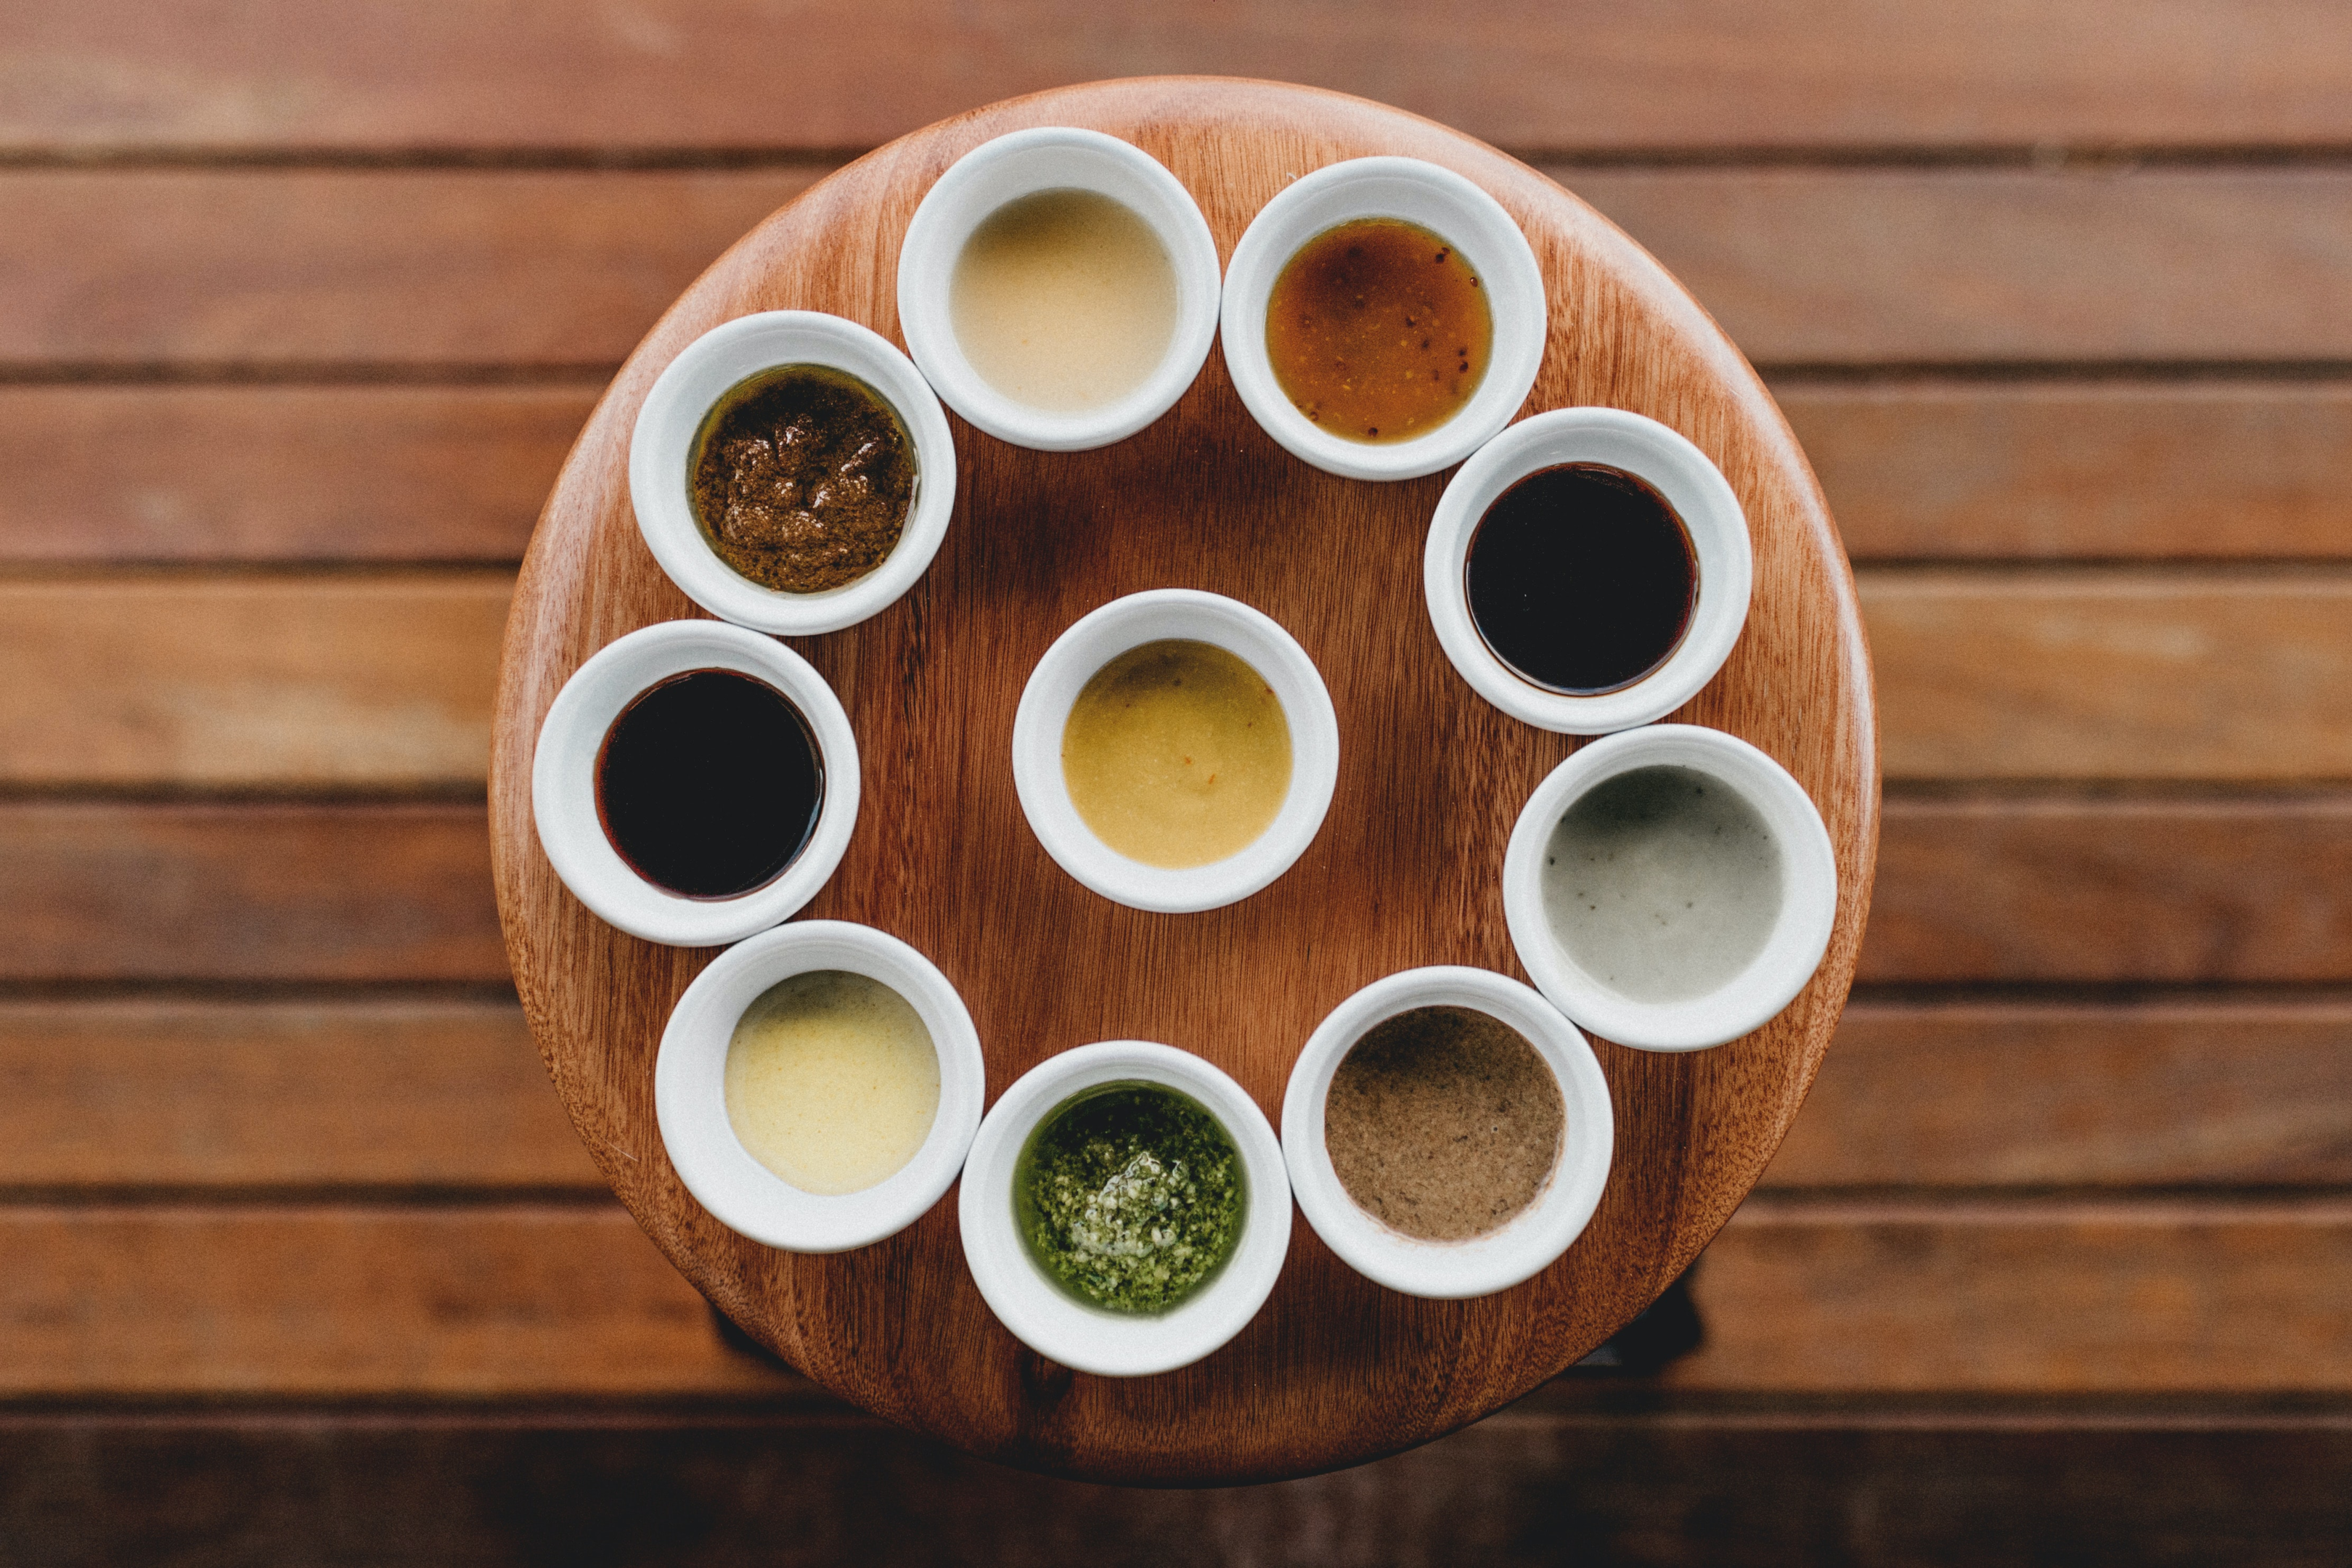 Factors Affecting the Quality of Garlic Dipping Sauce